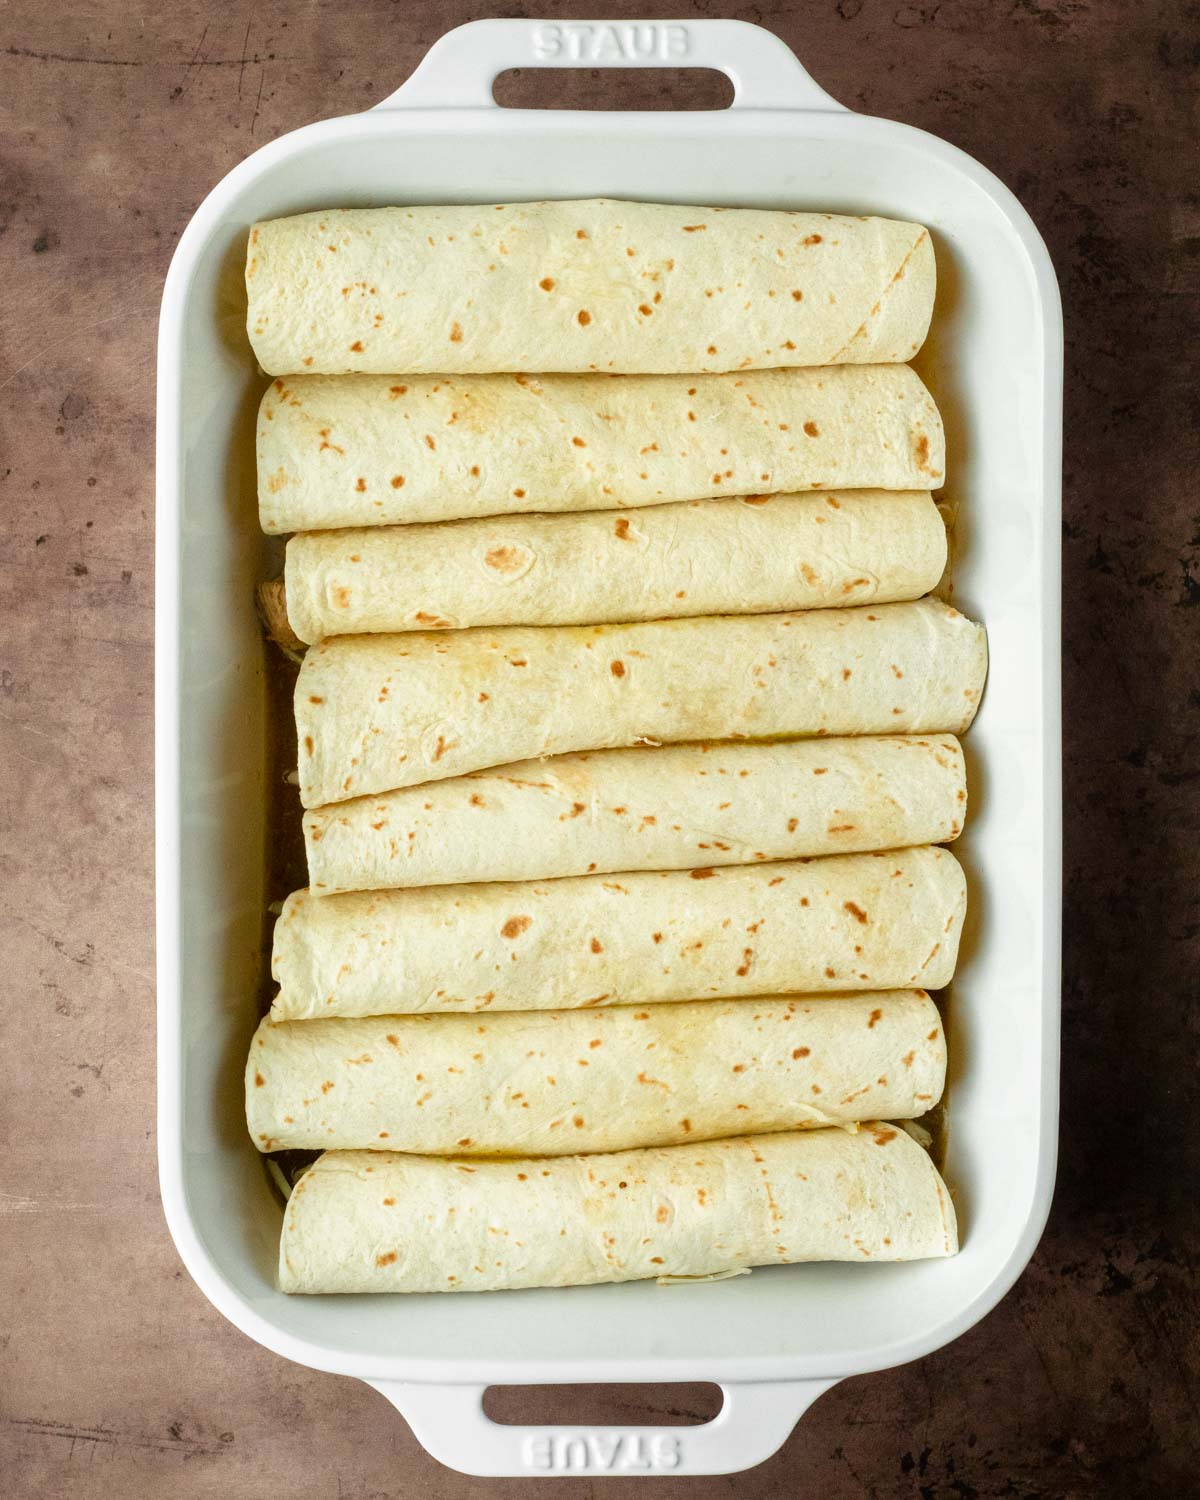 Step 1. Fill the tortillas with meat and cheese, roll up and place in the baking pan